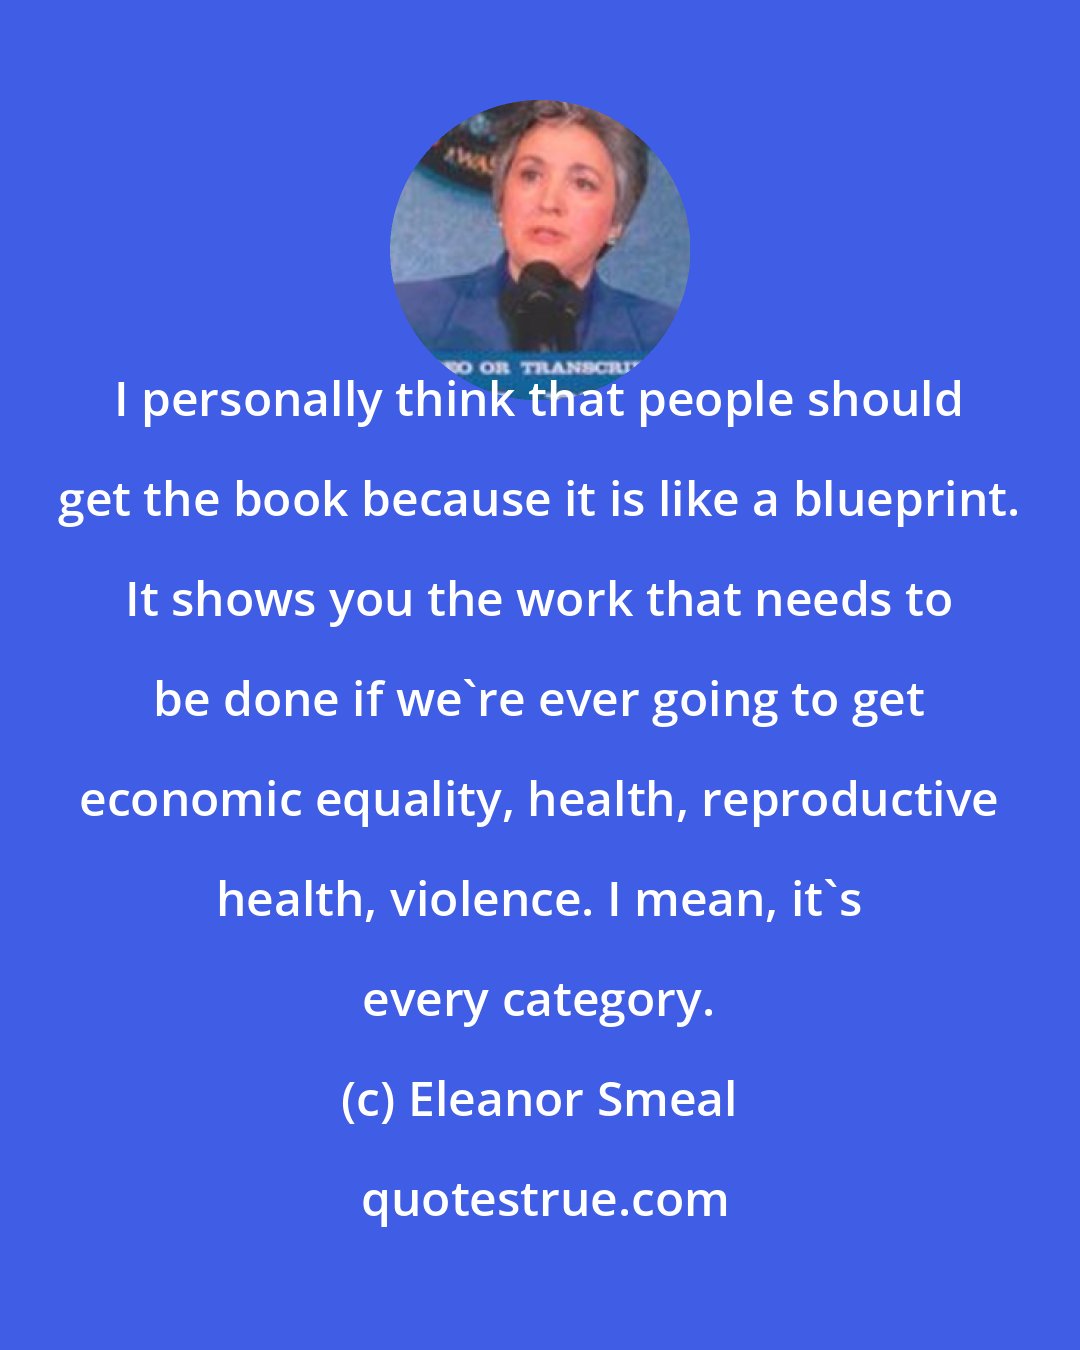 Eleanor Smeal: I personally think that people should get the book because it is like a blueprint. It shows you the work that needs to be done if we're ever going to get economic equality, health, reproductive health, violence. I mean, it's every category.